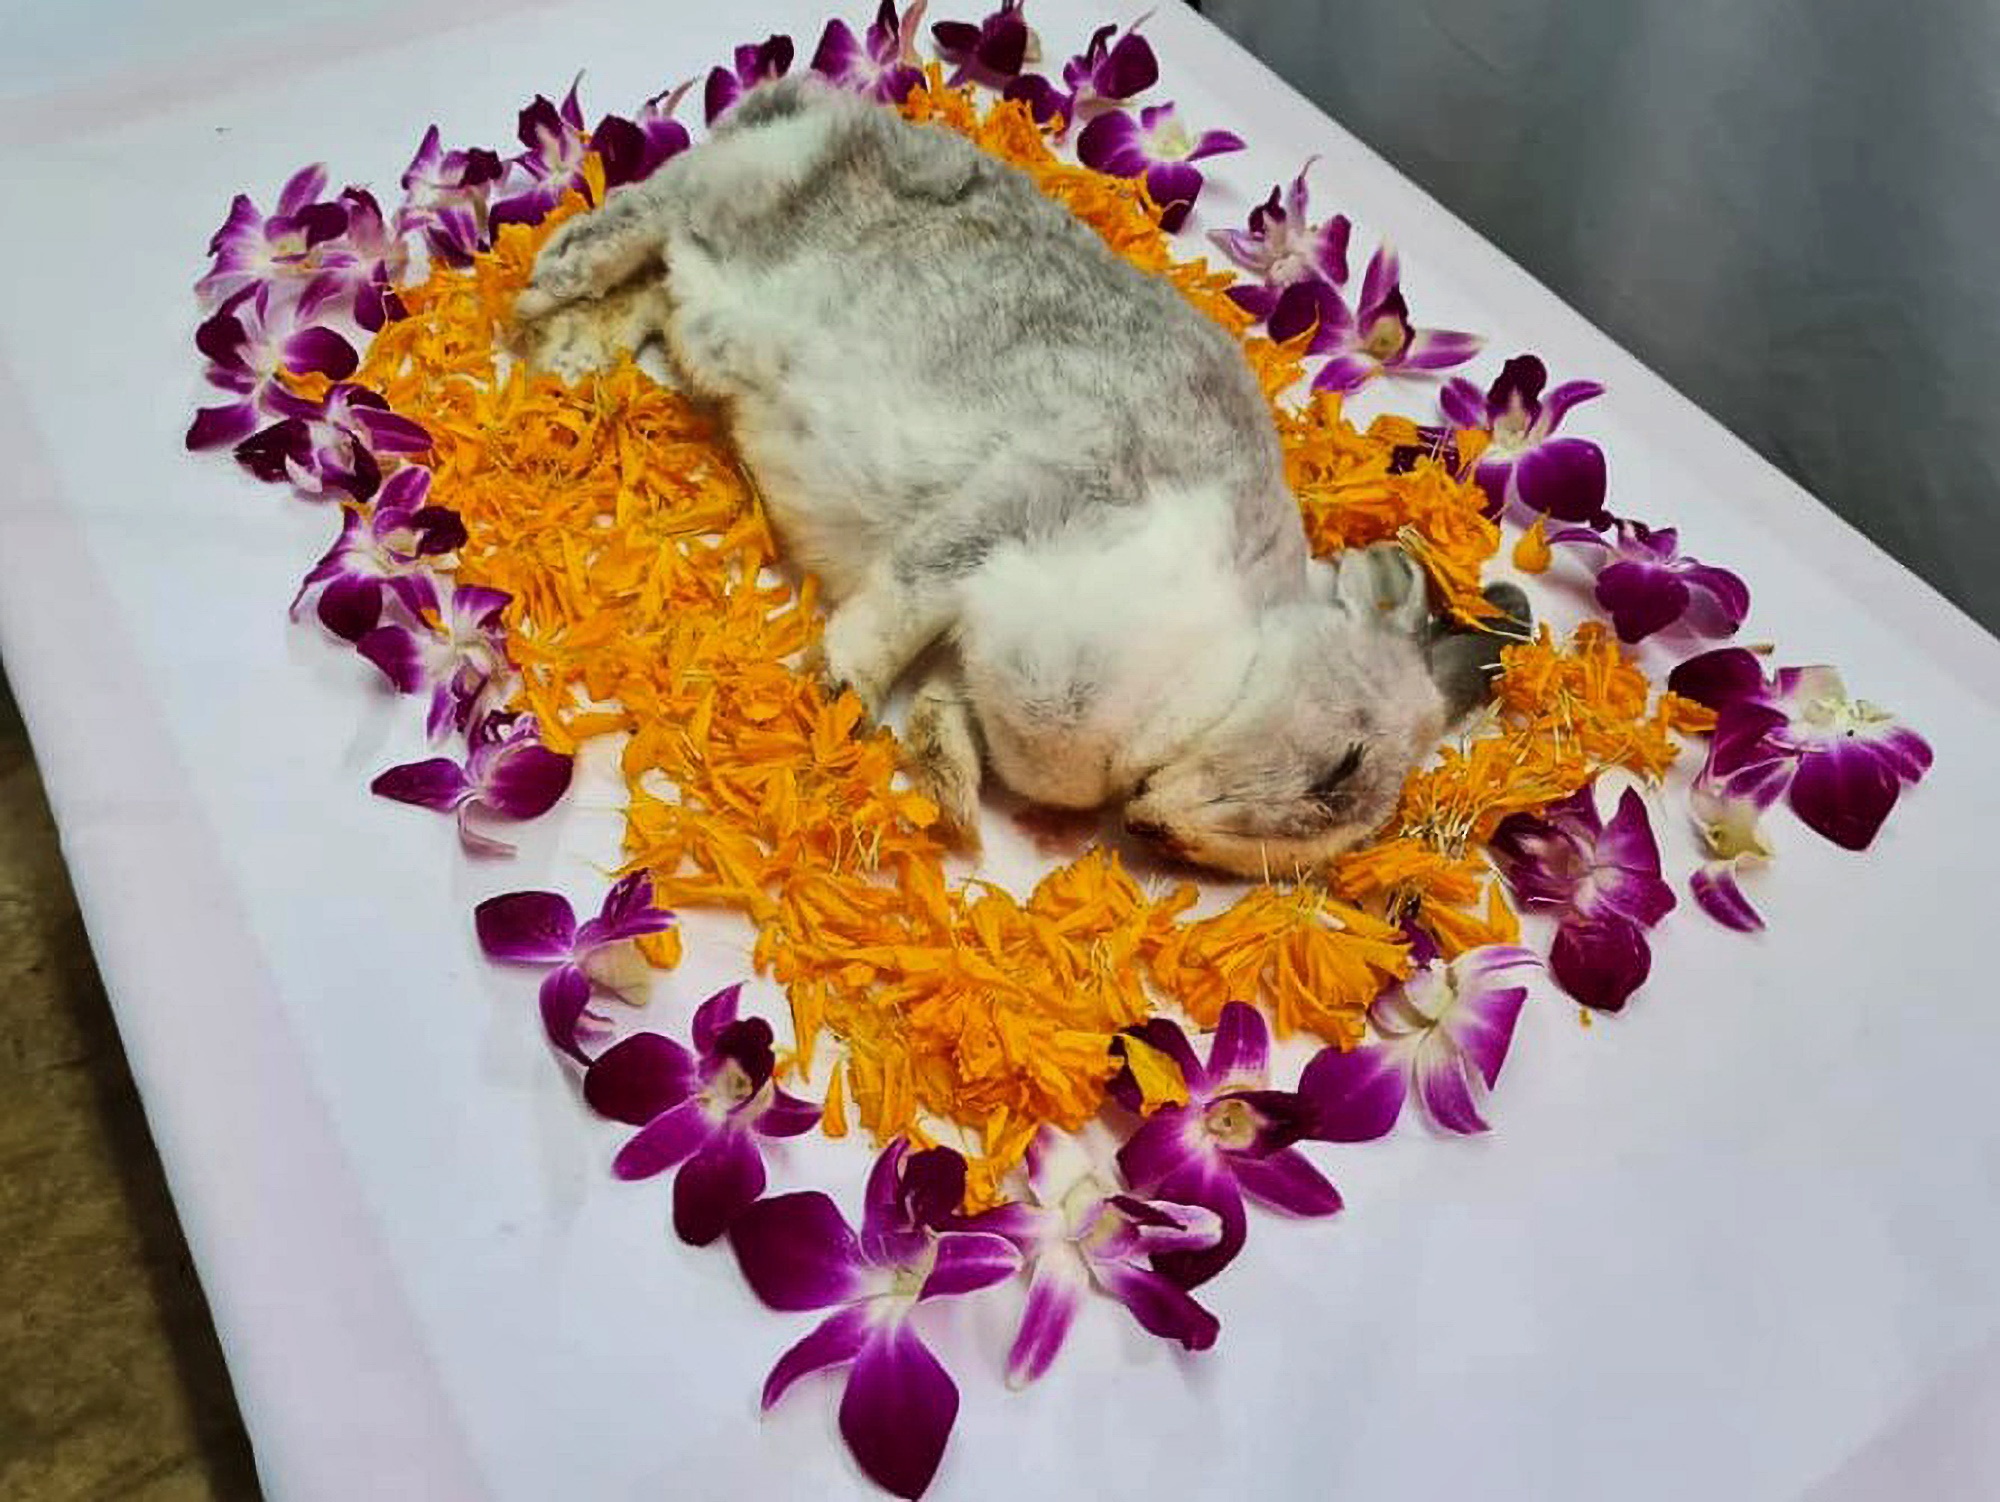 Read more about the article Animal Lover Group Gives Dead Rabbit Found In Rubbish Bin A Proper Send Off With Flower Petals